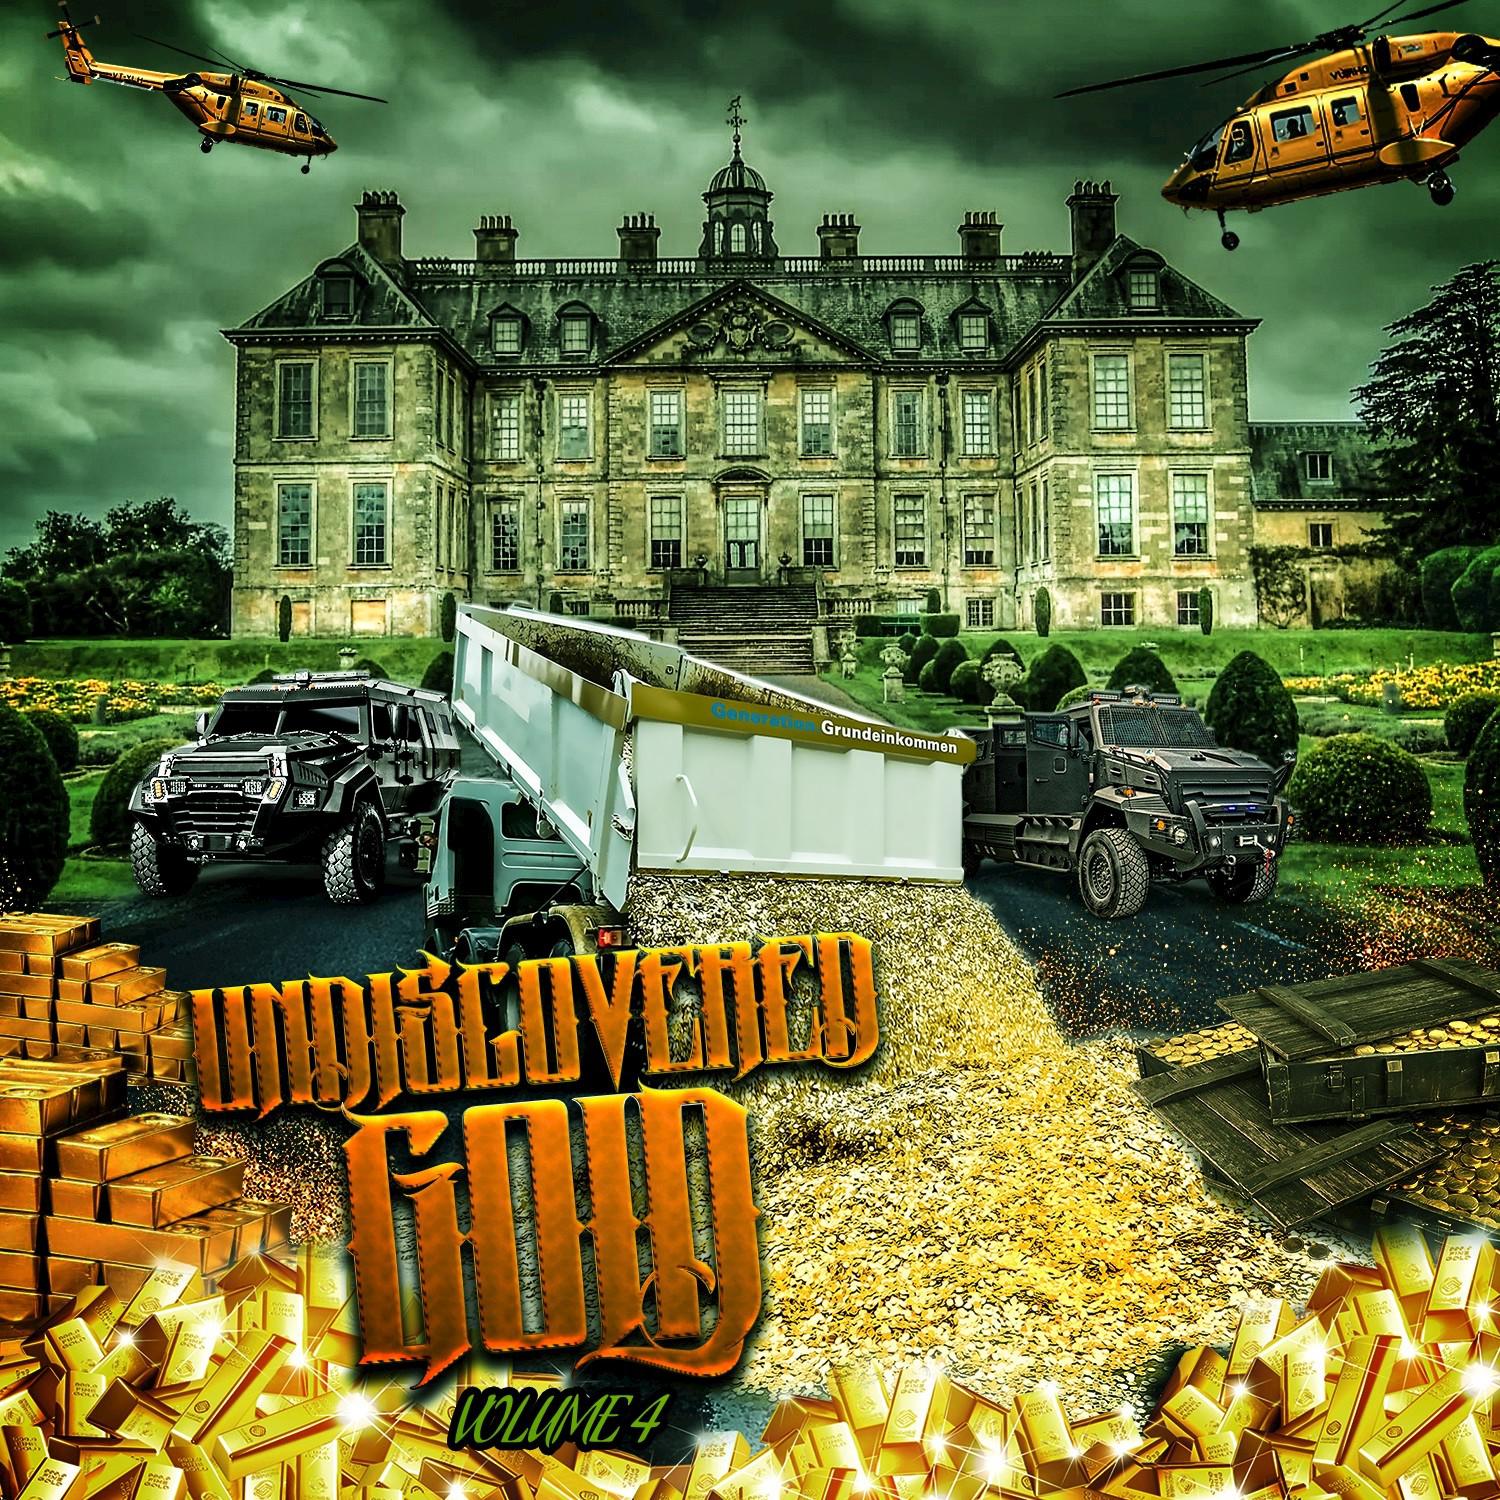 Undiscovered Gold, Vol. 4